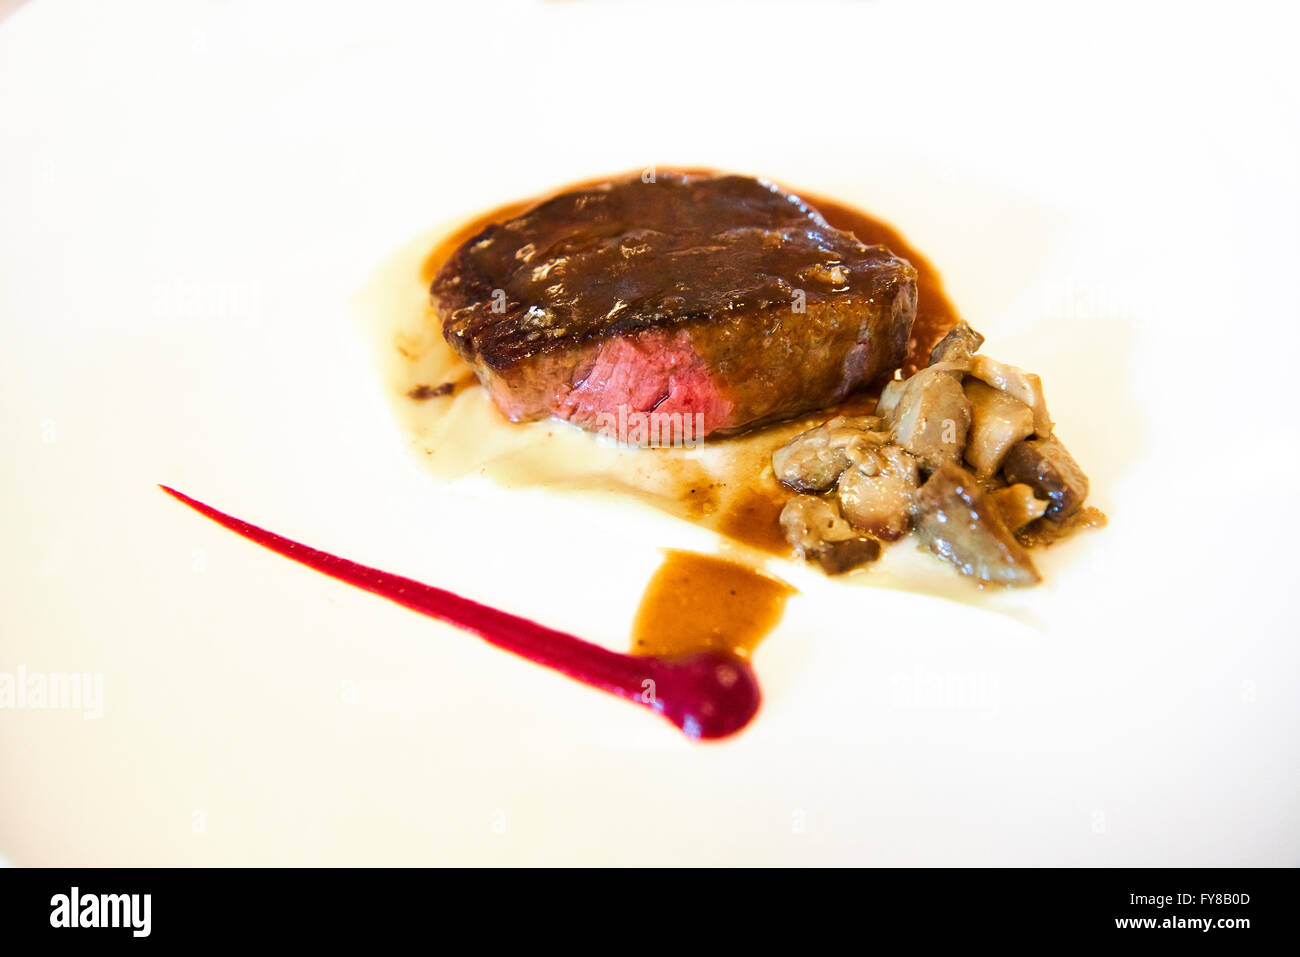 Grilled Sirloin Steak with Mushrooms Stock Photo